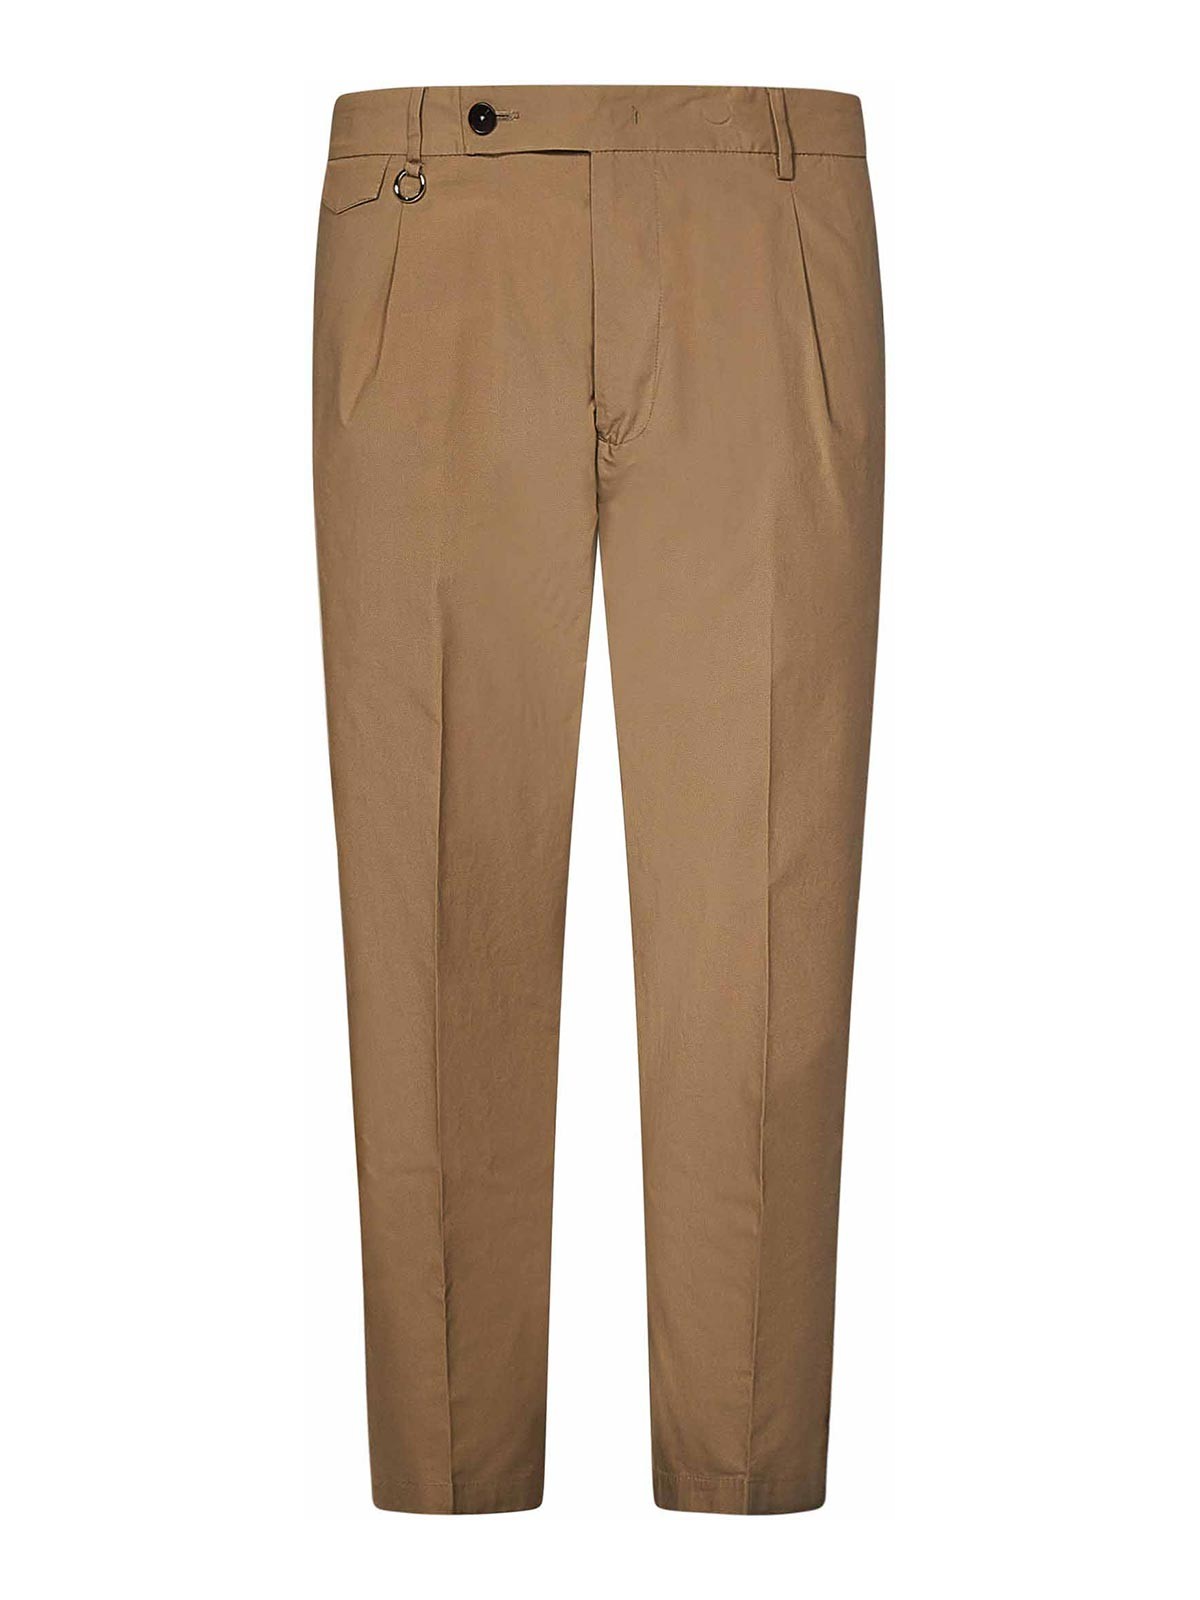 Golden Craft Camel-colored Chino Trousers